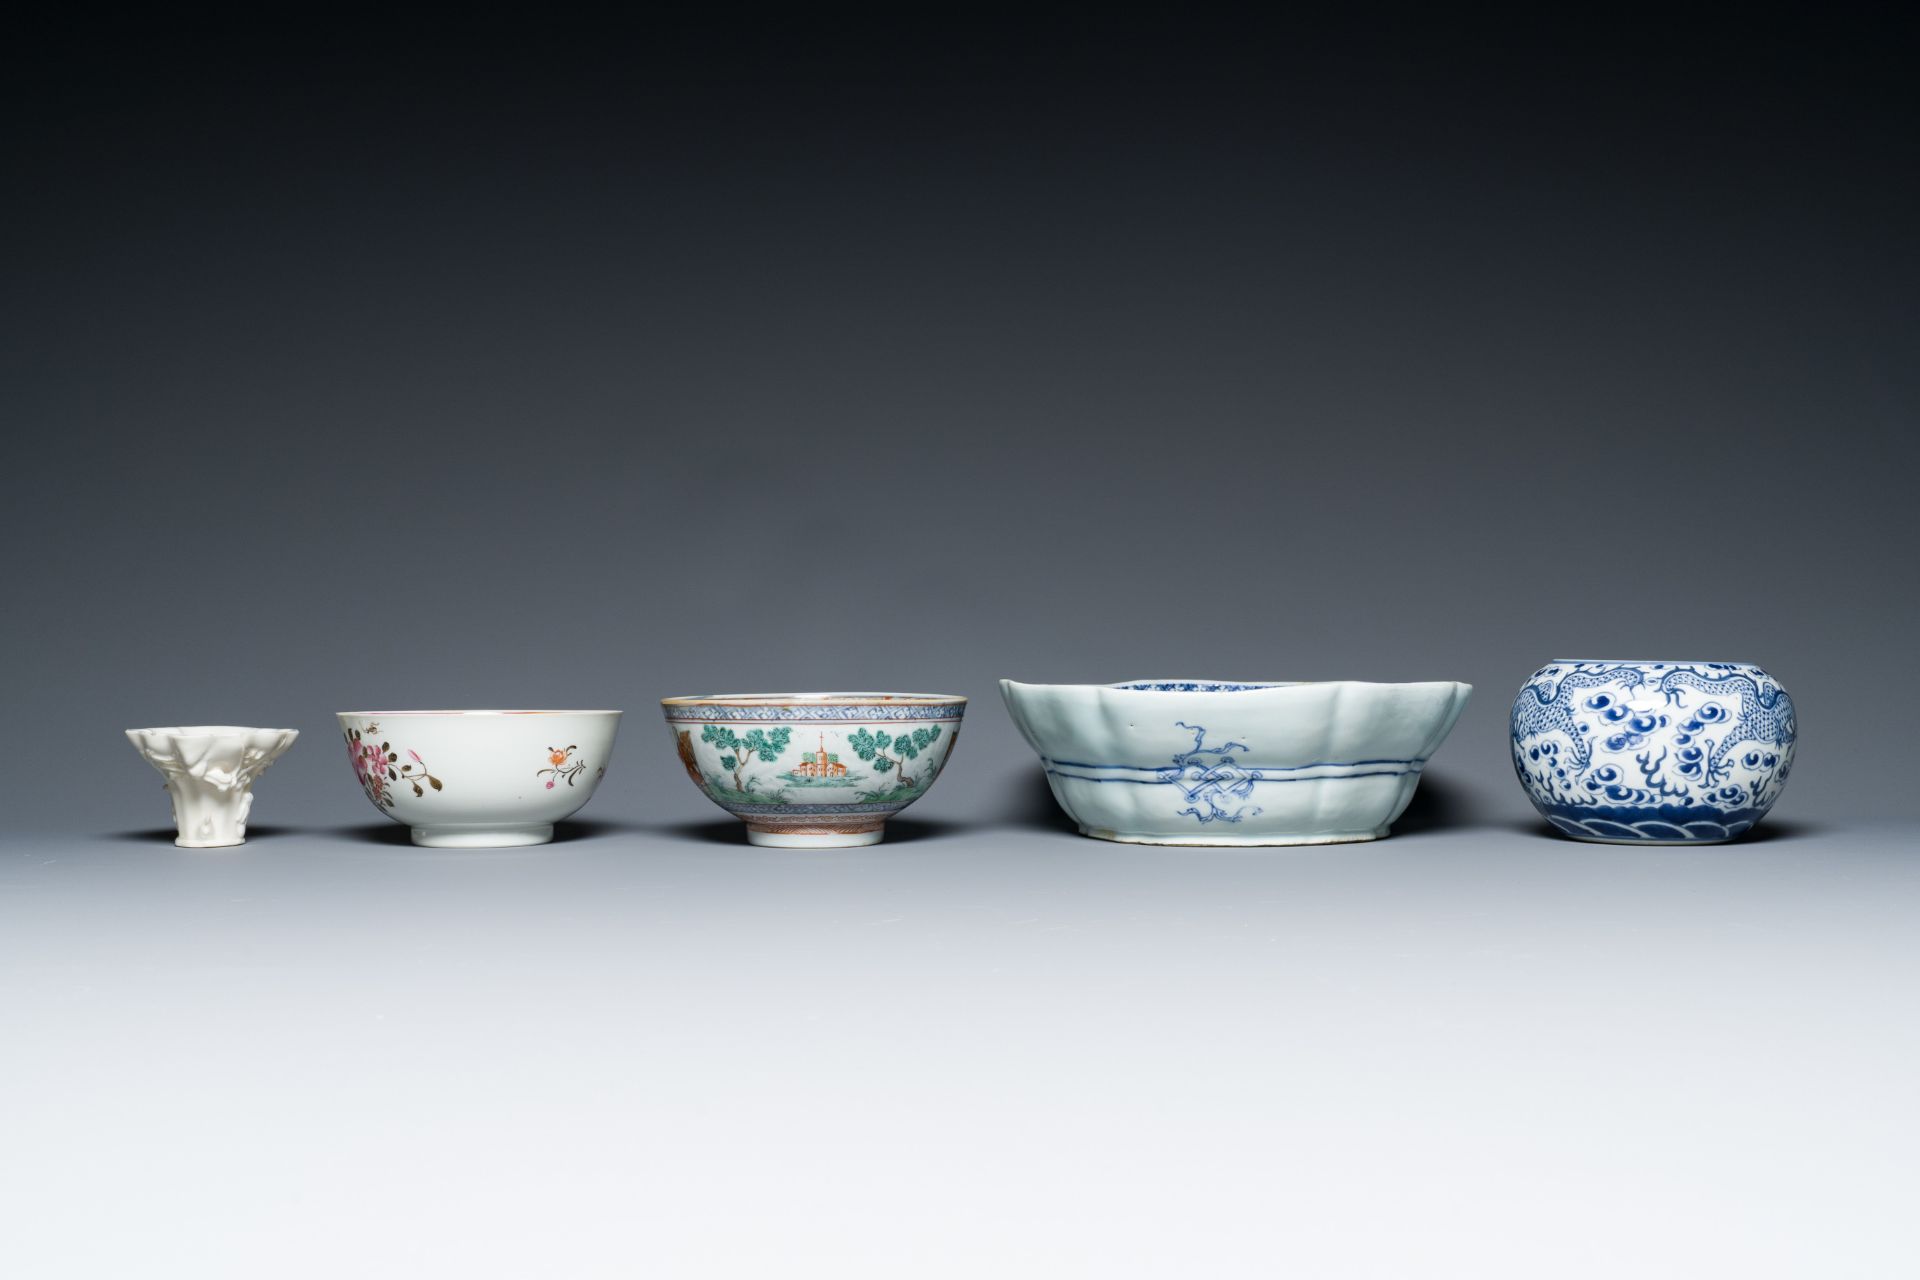 A varied collection of Chinese porcelain, 18/19th C. - Image 4 of 9